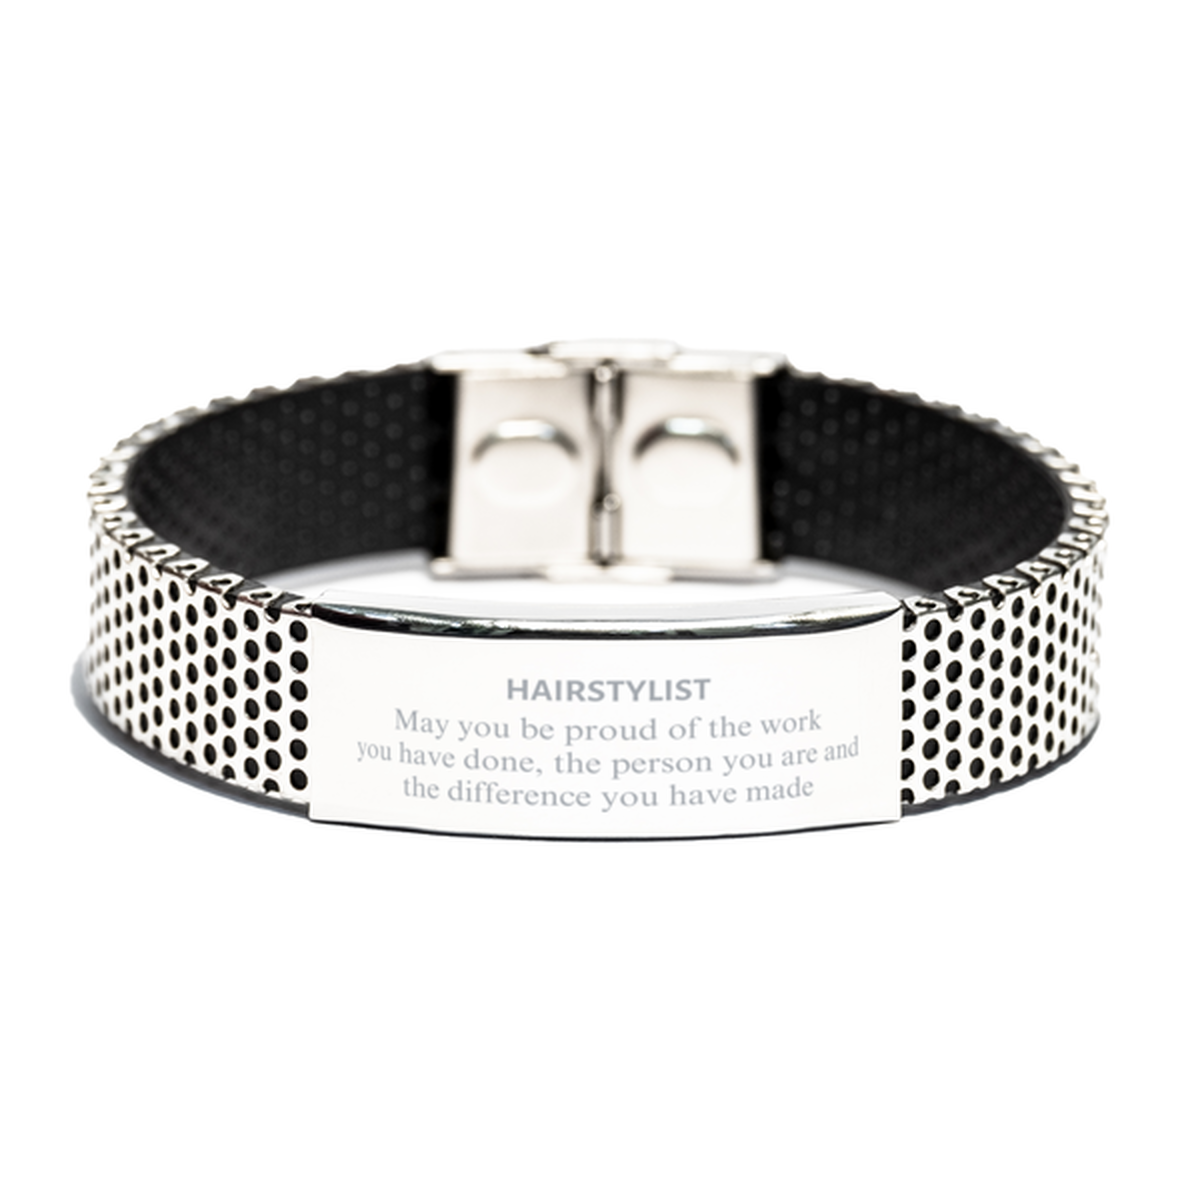 Hairstylist May you be proud of the work you have done, Retirement Hairstylist Stainless Steel Bracelet for Colleague Appreciation Gifts Amazing for Hairstylist